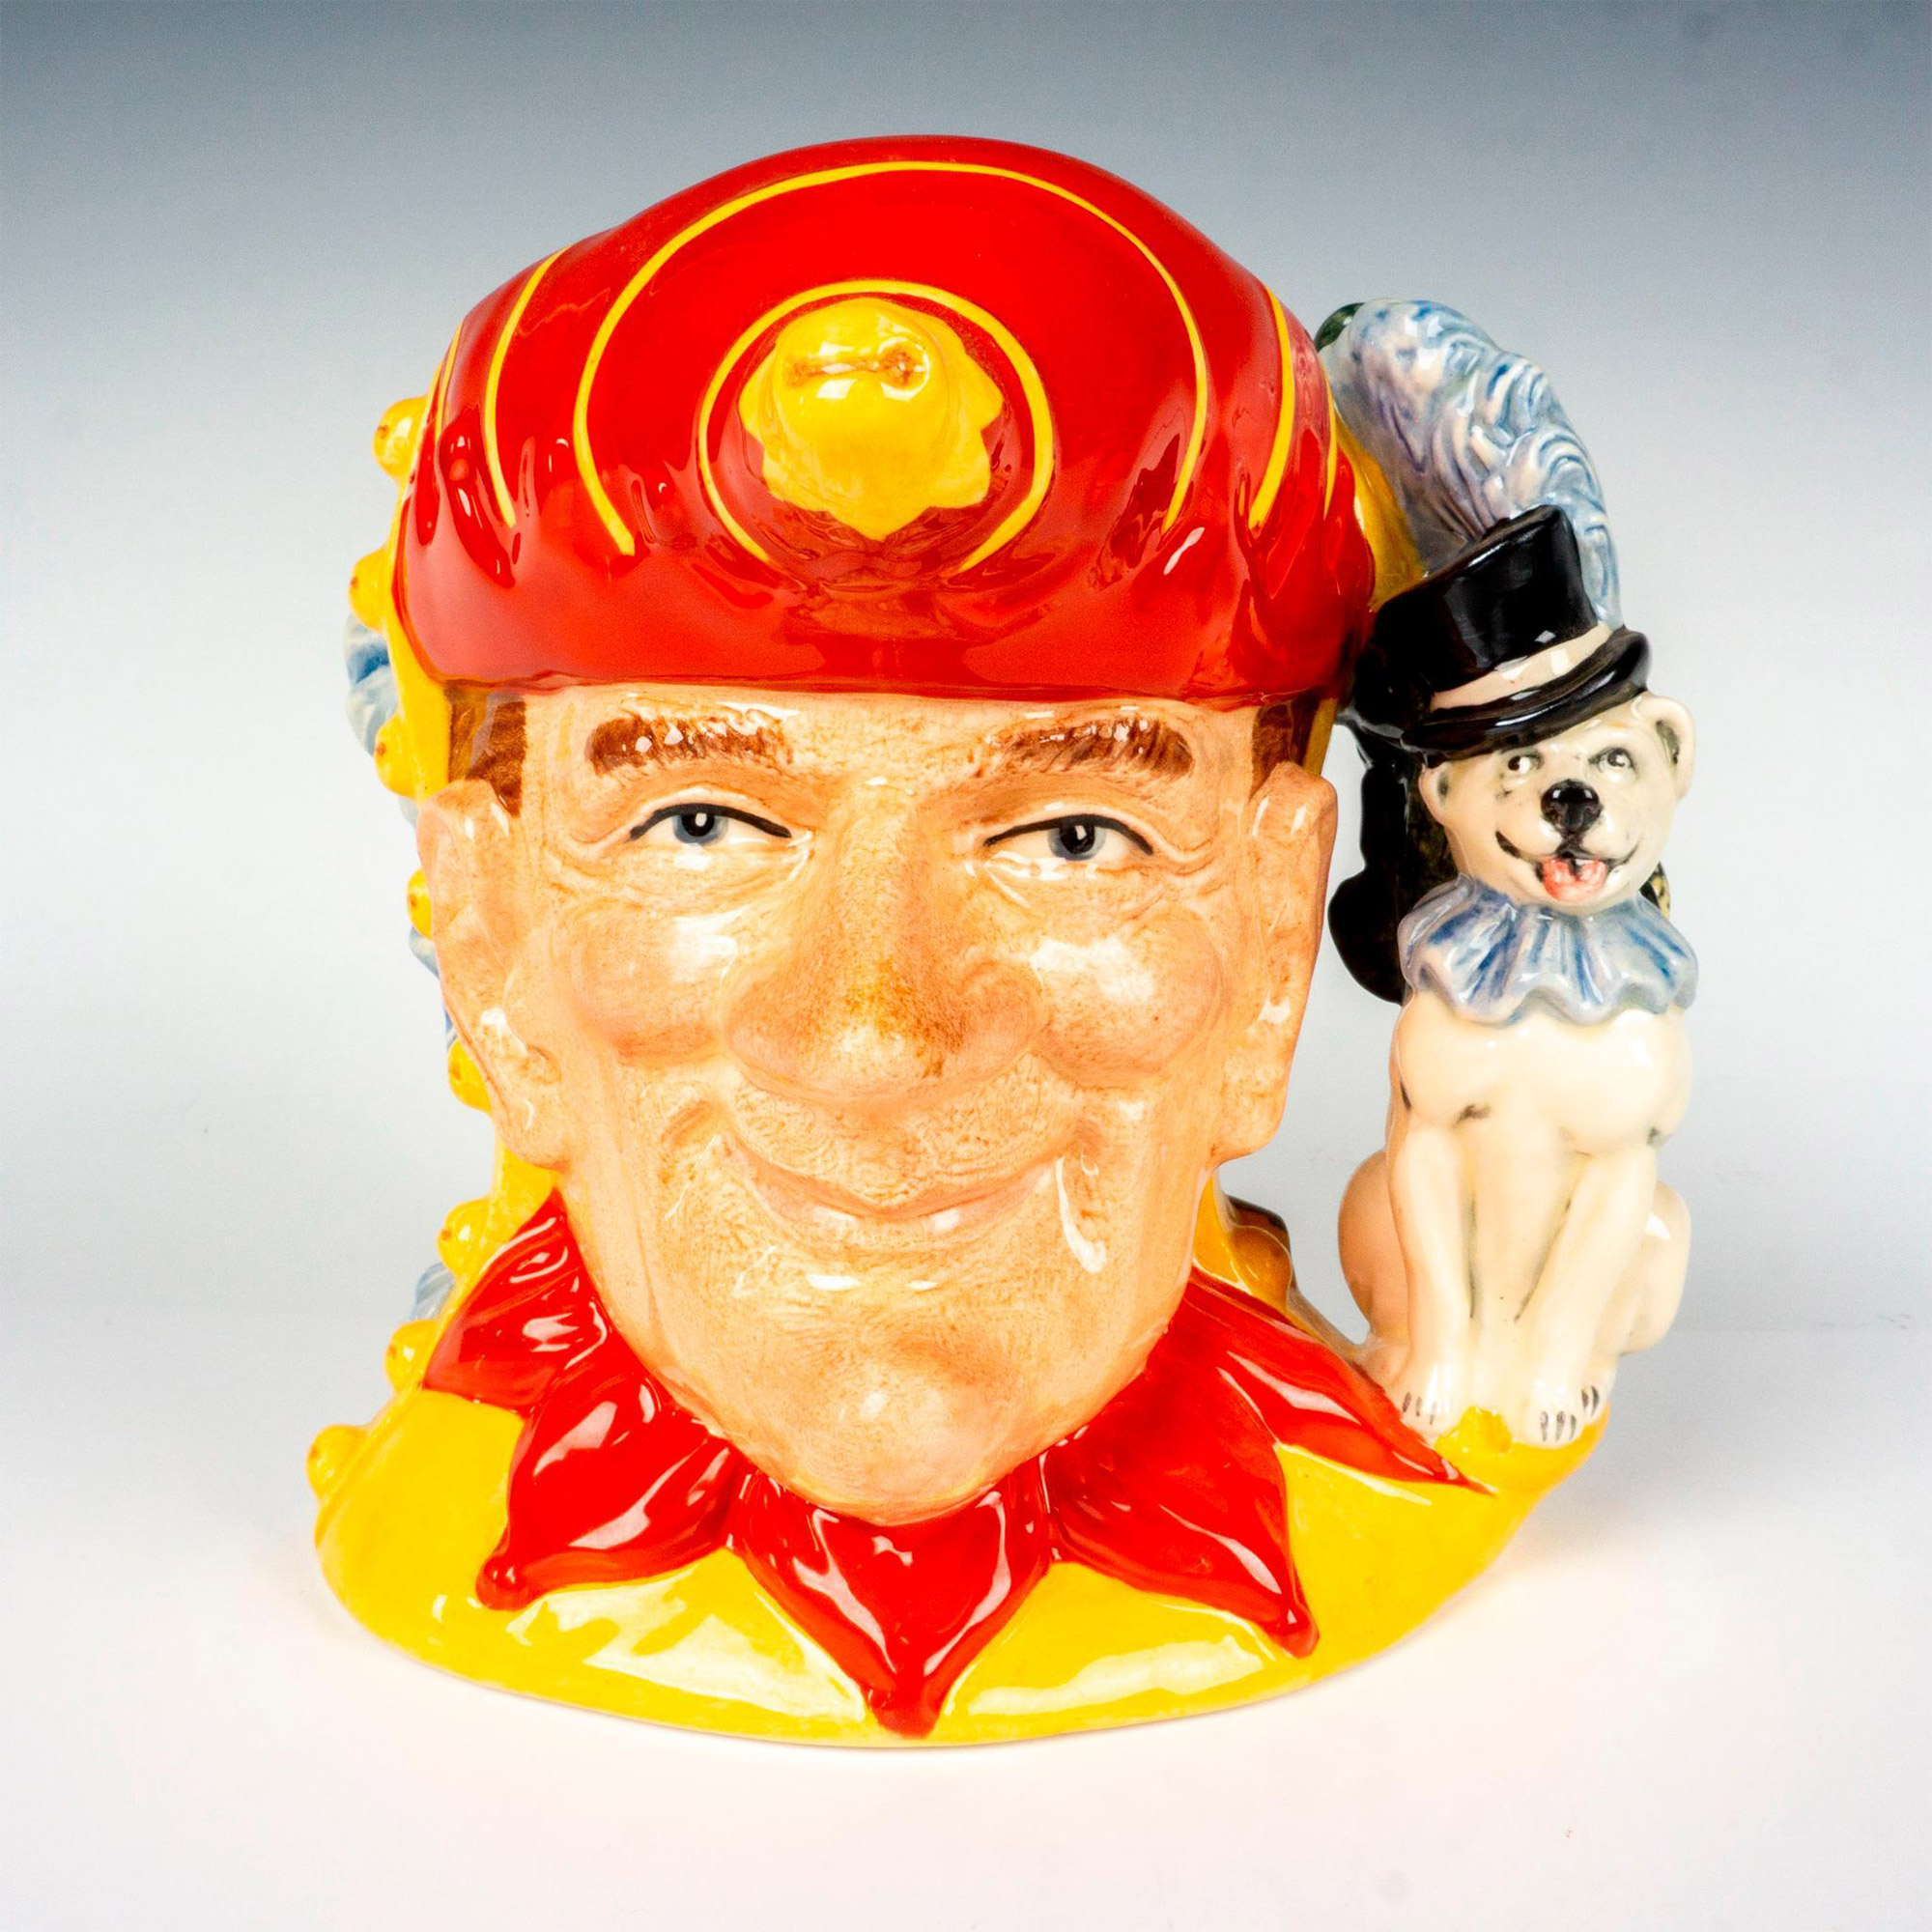 Punch and Judy D6946 (Double-Faced) - Large - Royal Doulton Character Jug - Image 2 of 4